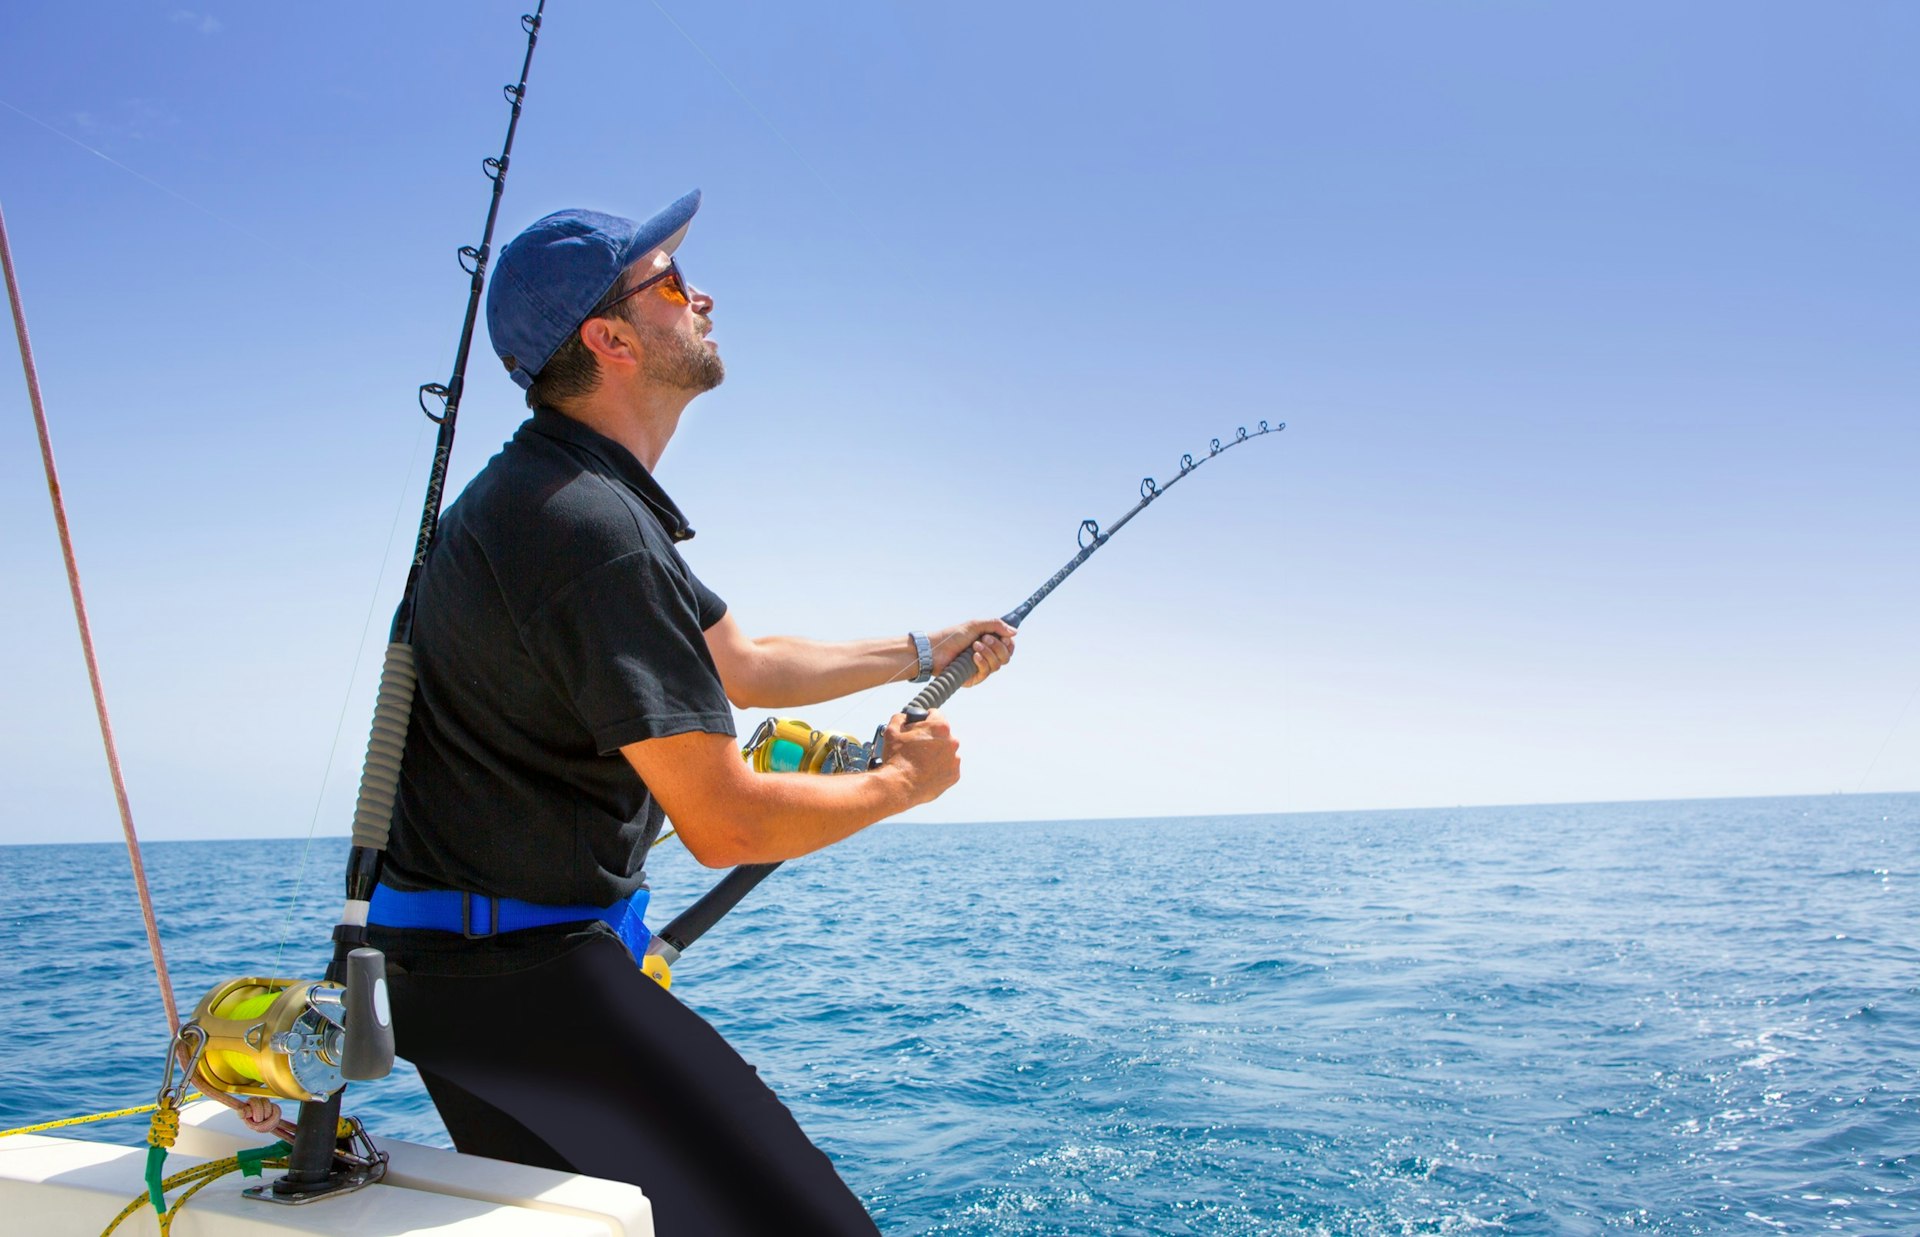 Blue,Sea,Offshore,Fishing,Boat,With,Fisherman,Holding,Rod,In